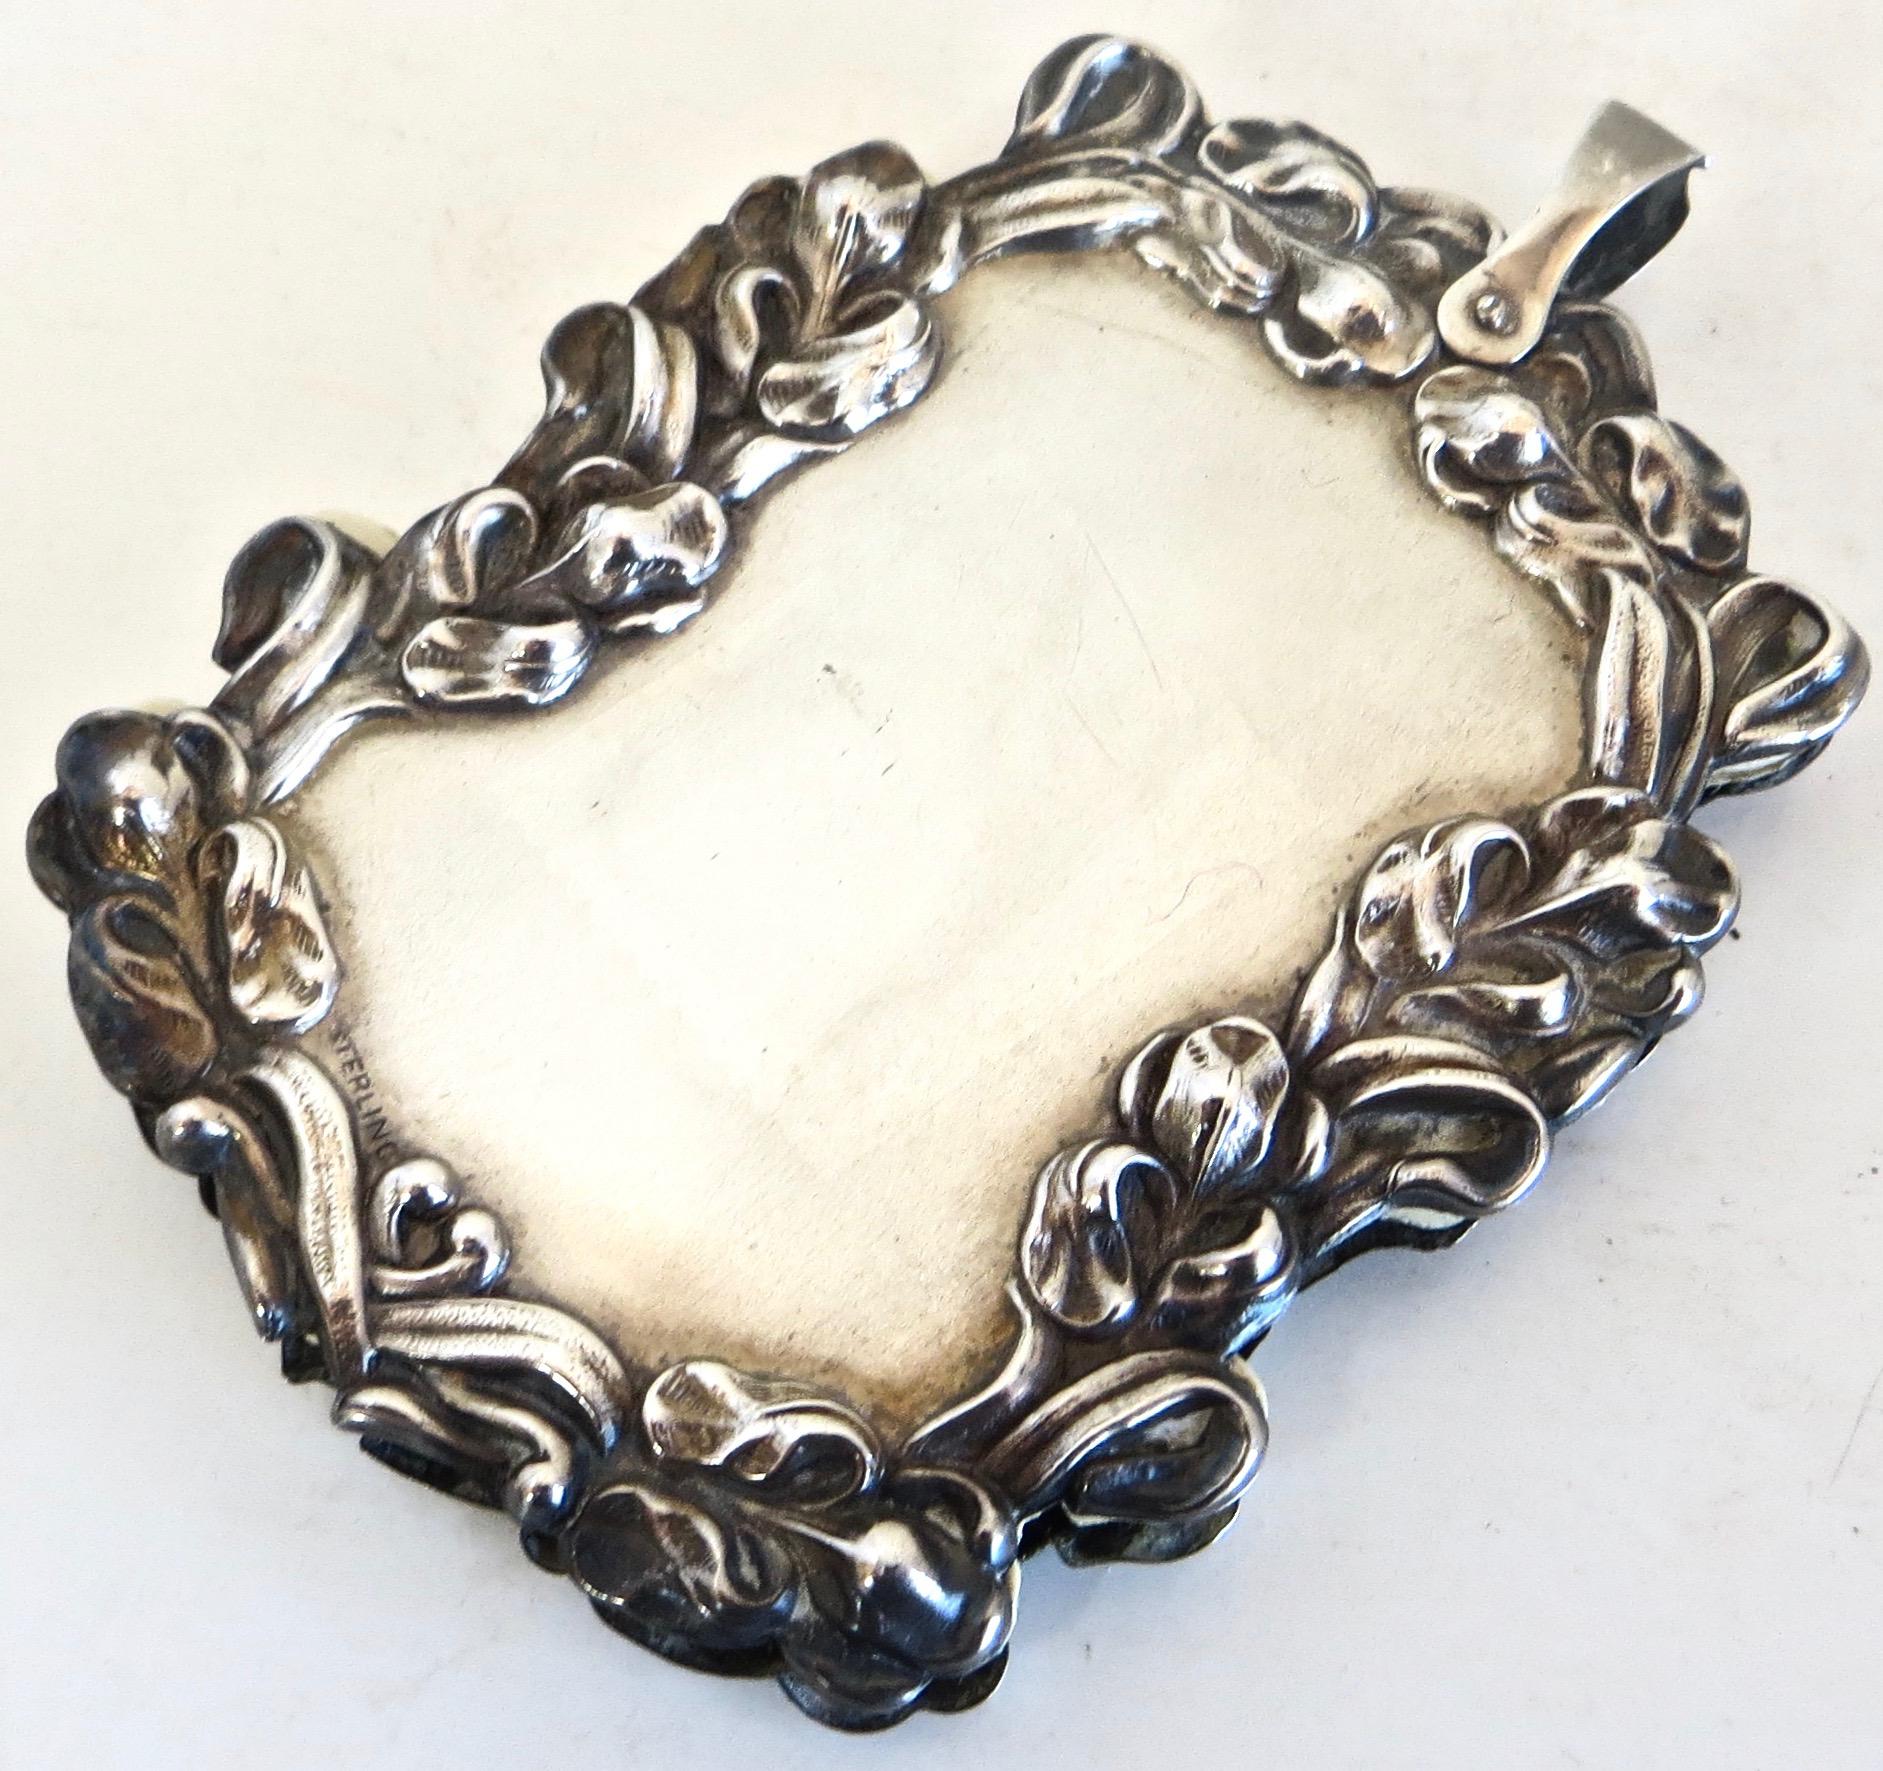 Very rare and unusual piece, a sterling silver 